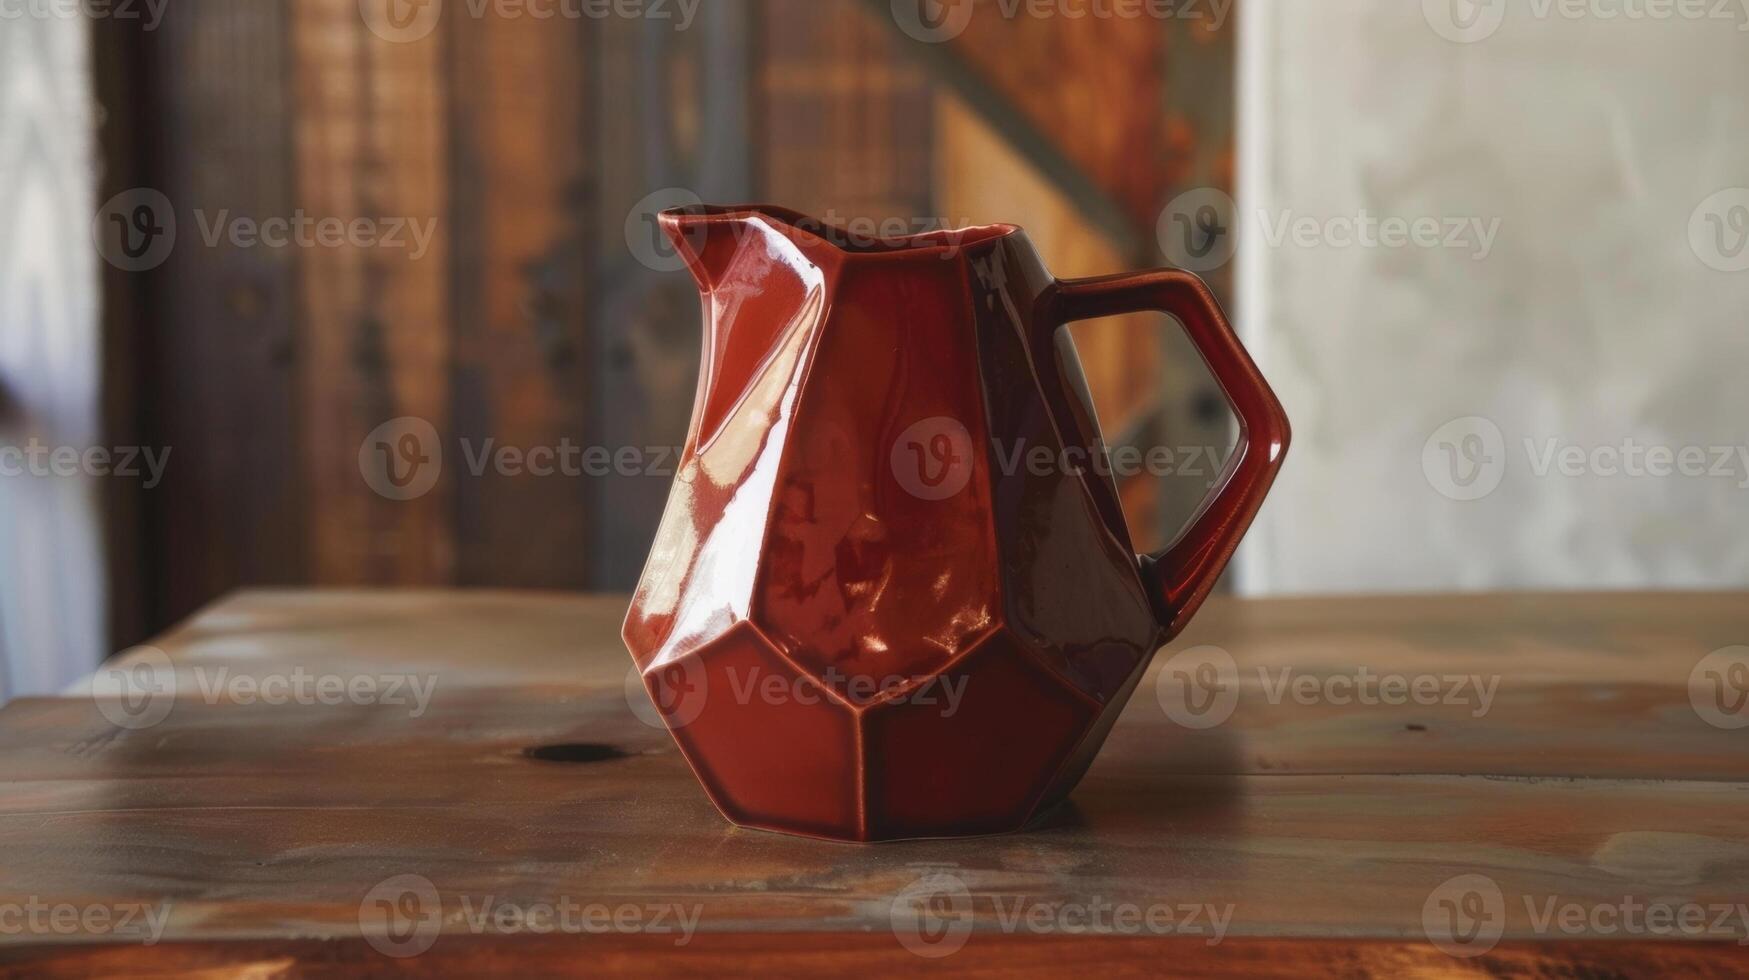 A sculptural pitcher with a geometric handle glazed in a rich burgundy color and designed for pouring beverages with ease. photo